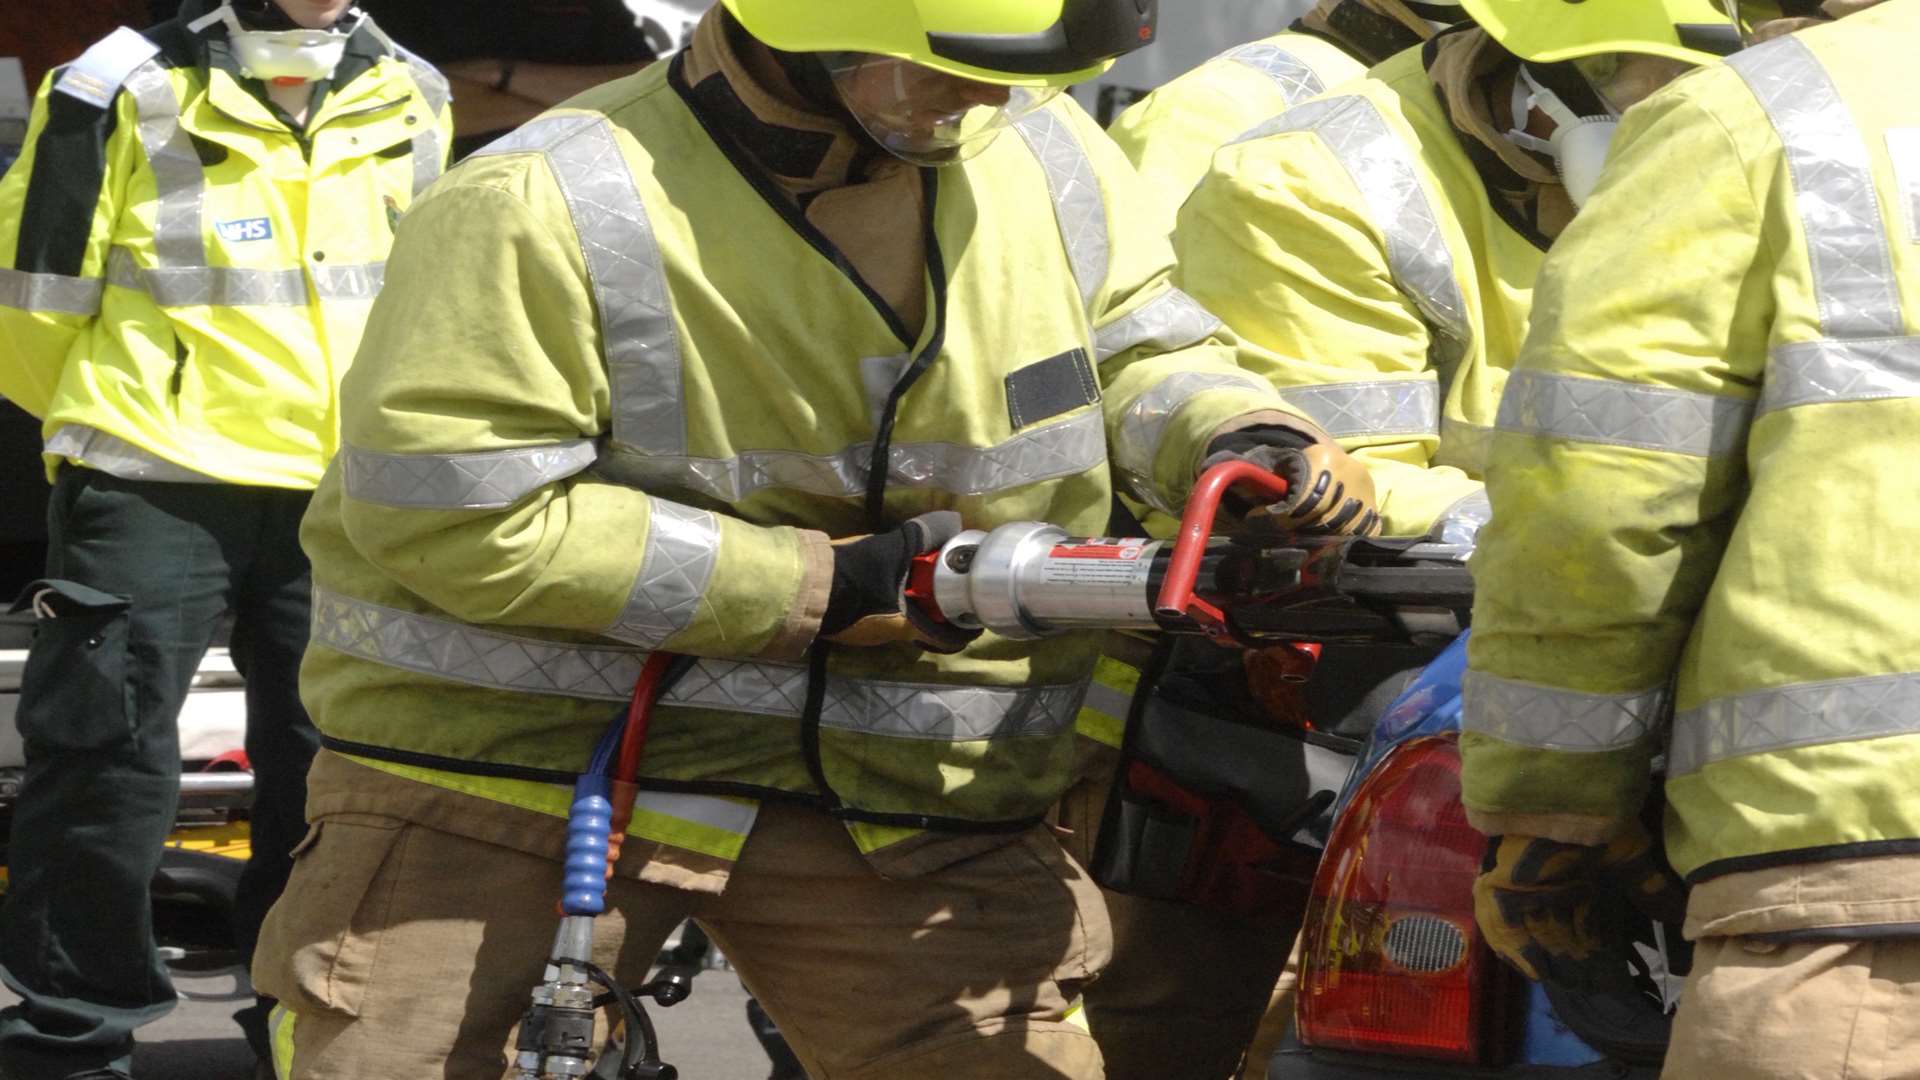 Firefighters using cutting gear. Stock image